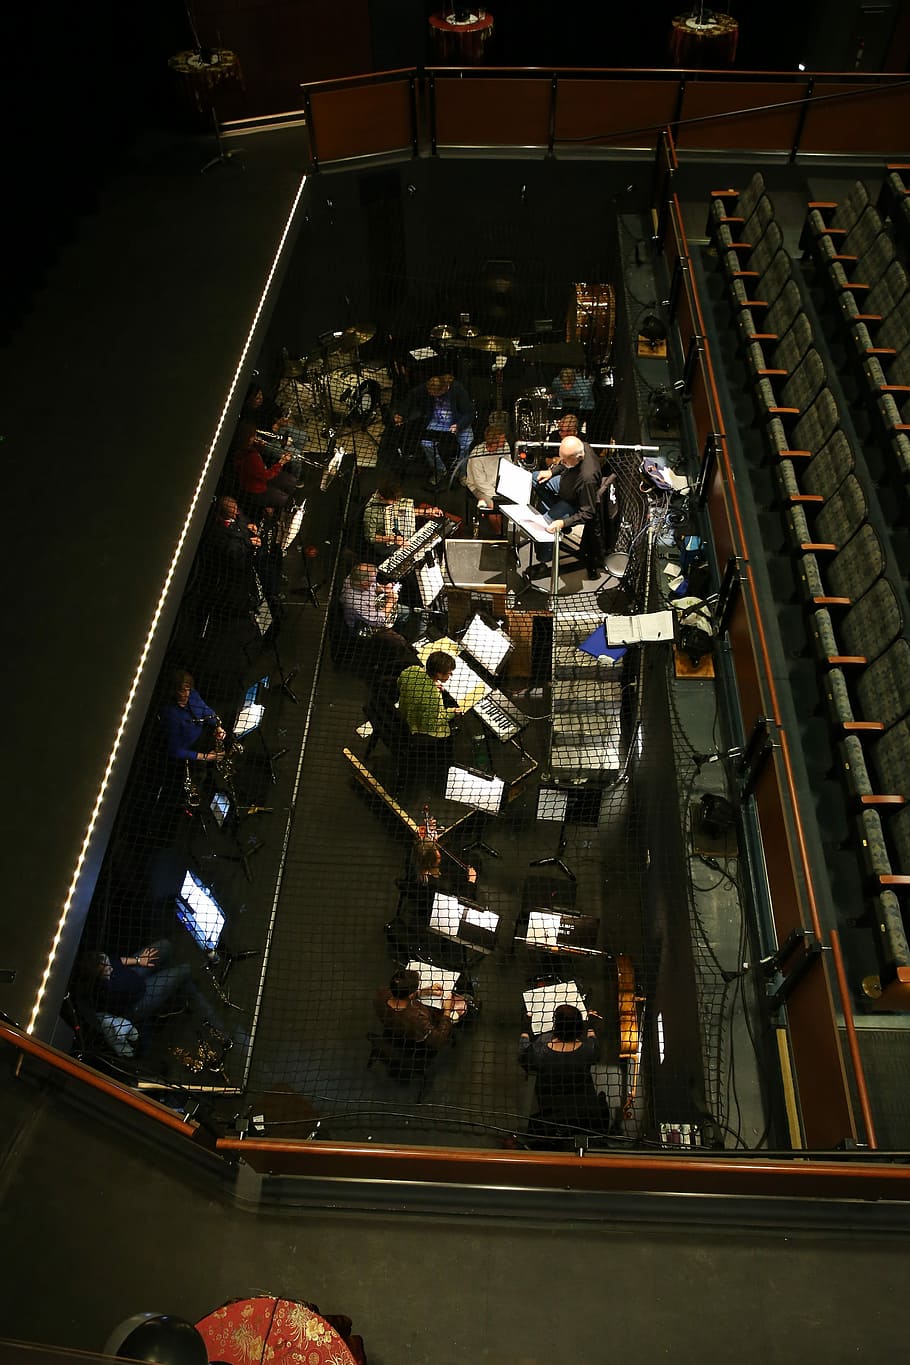 Tech, Theatre, Theater, Orchestra Pit, orchestra, pit, entertainment, music, musical, only men